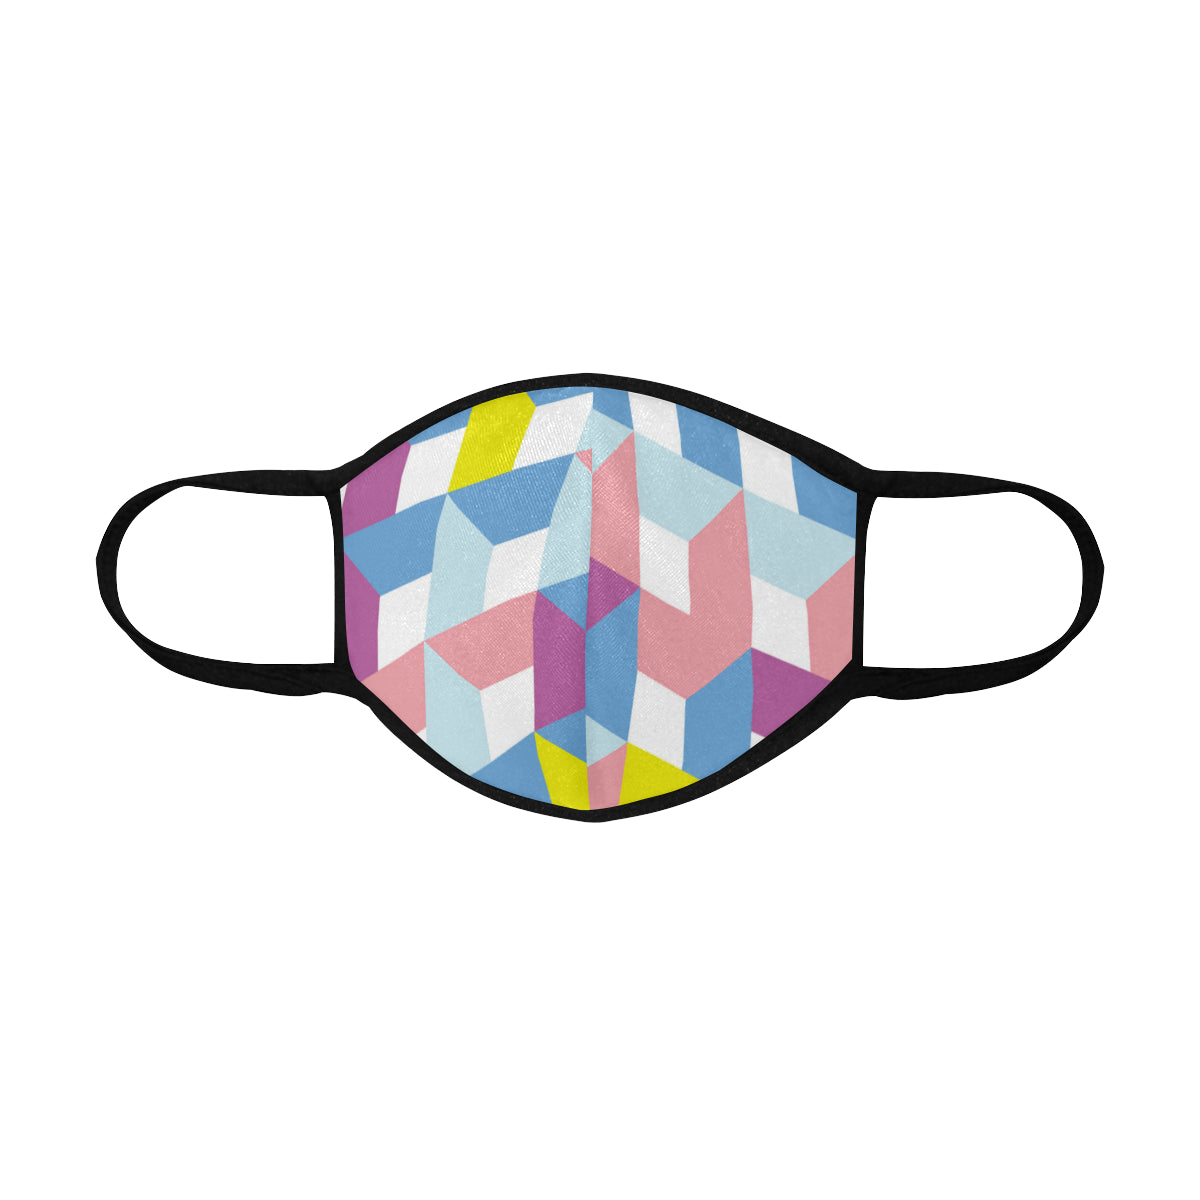 Diamond Graphic Cotton Fabric Face Mask with filter slot (30 Filters Included) - Non-medical use